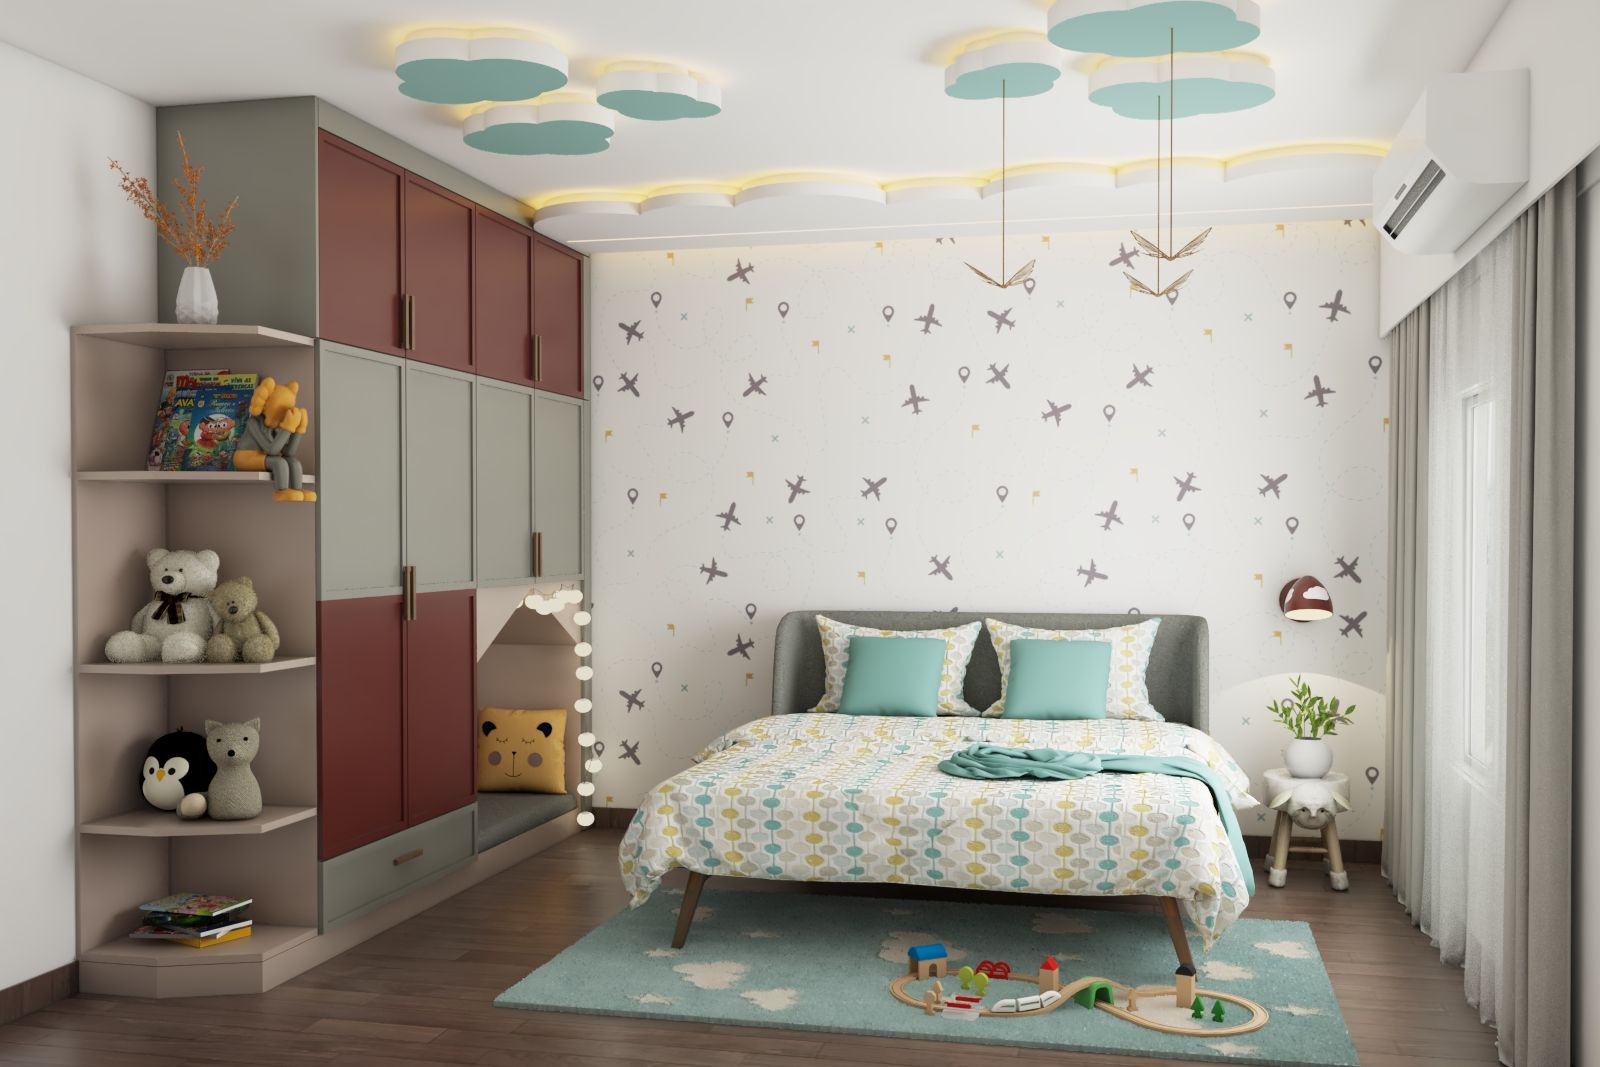 Contemporary Kids Bedroom Design With Open Storage Units